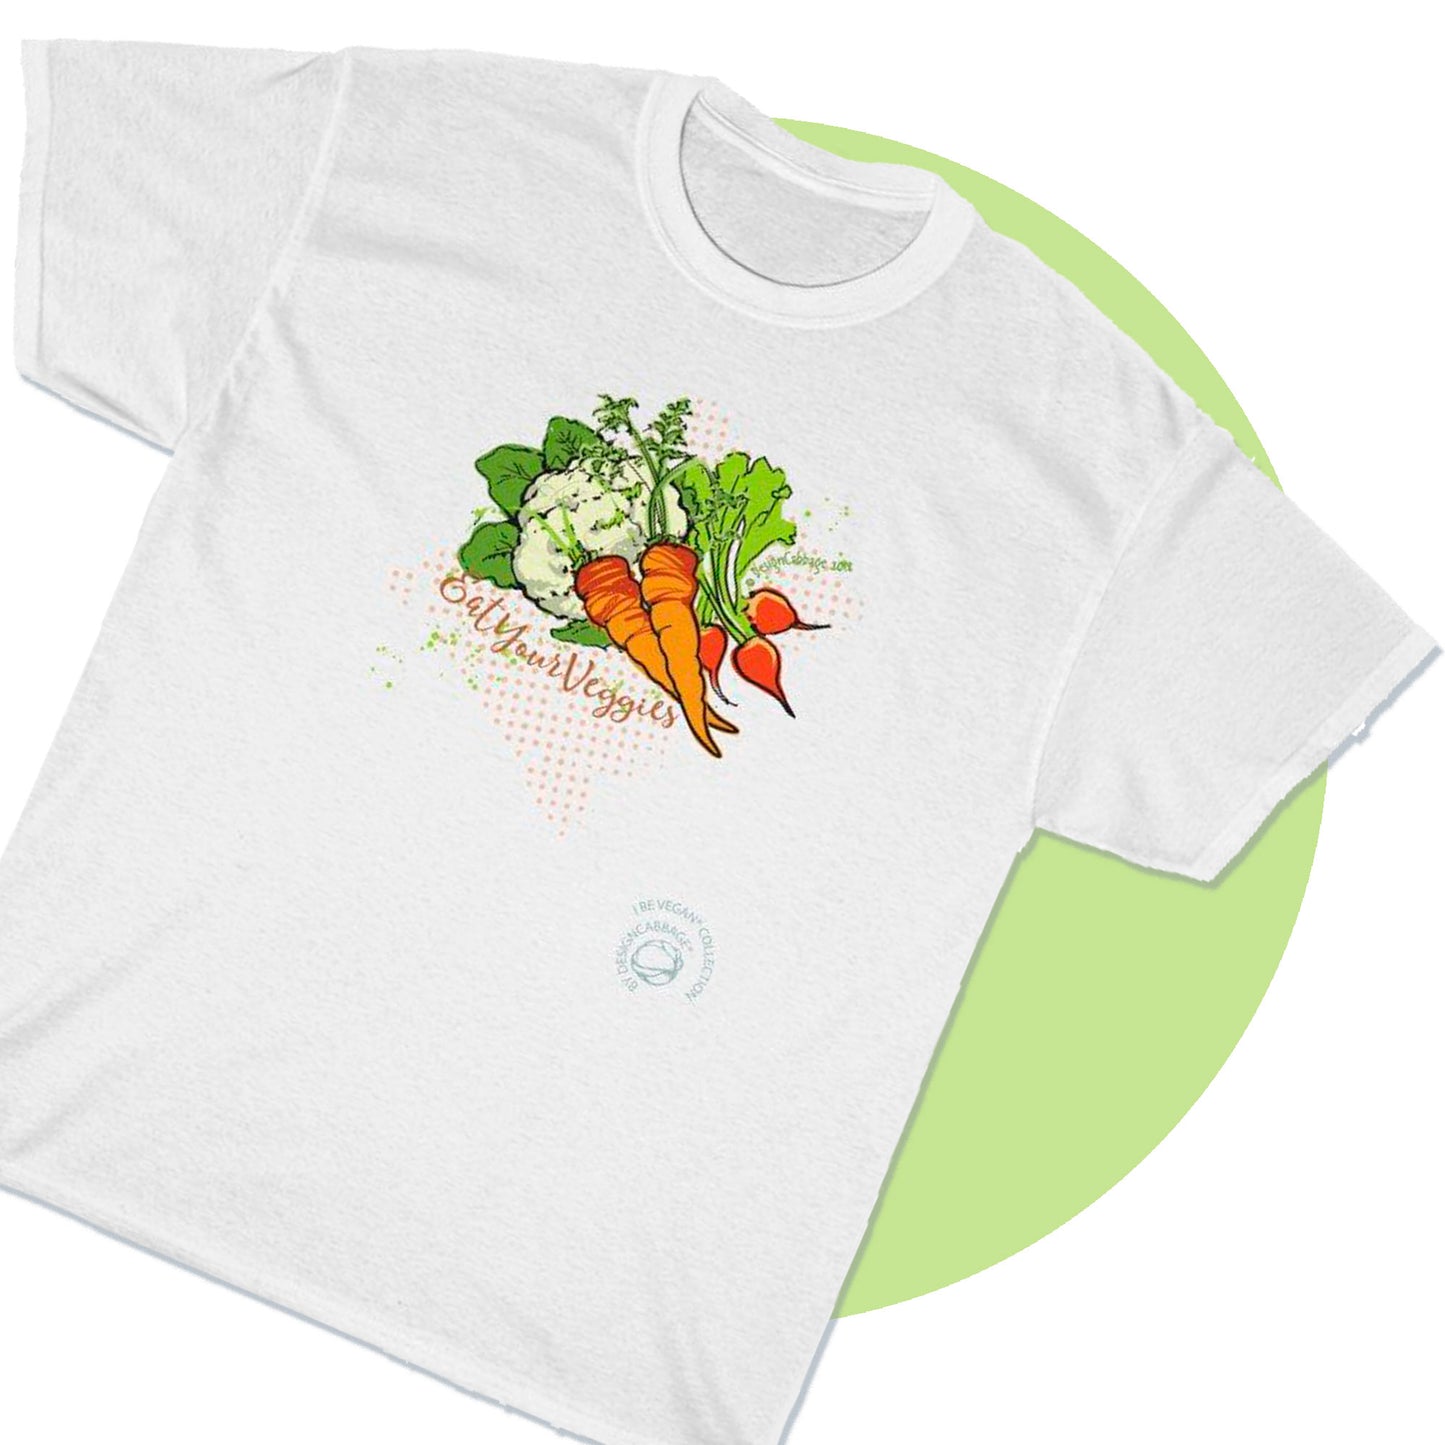 Vegetable Garden Graphic T-Shirt - I Be Vegan® Collection- Unisex-Fit Tee